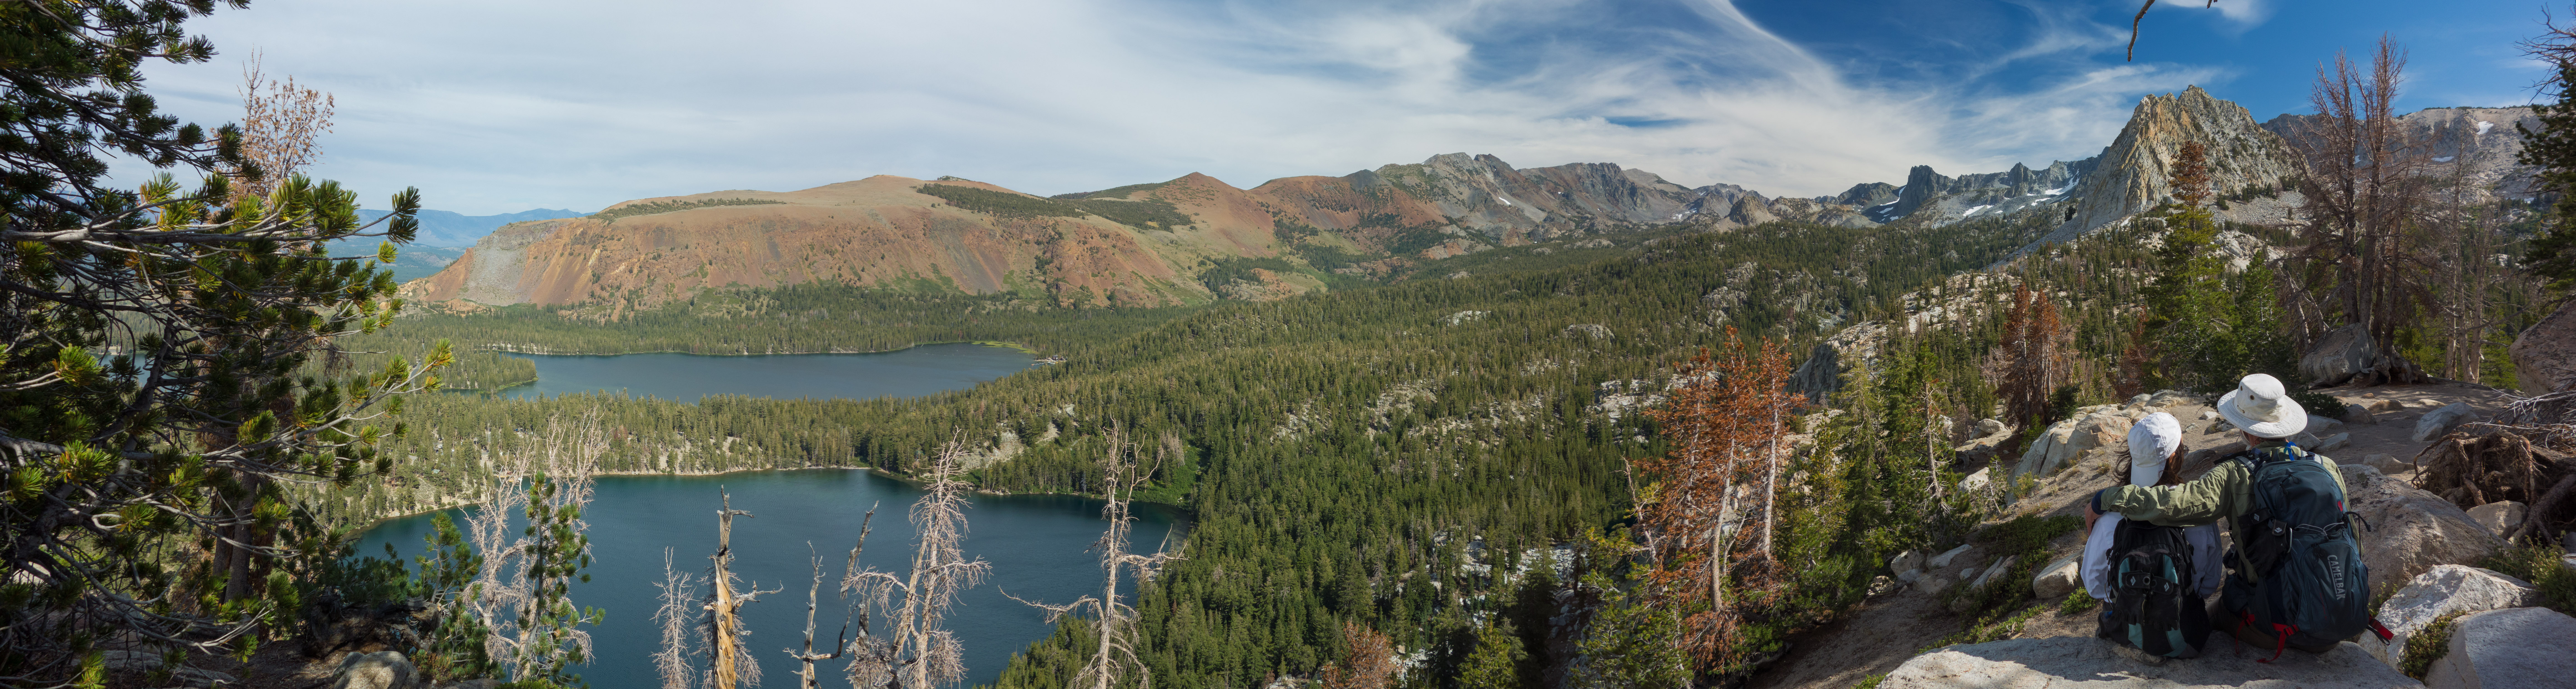 (l to r): Lake George, Lake Mary, Sherwin Crest, Mammoth Crest, and Crystal Crag